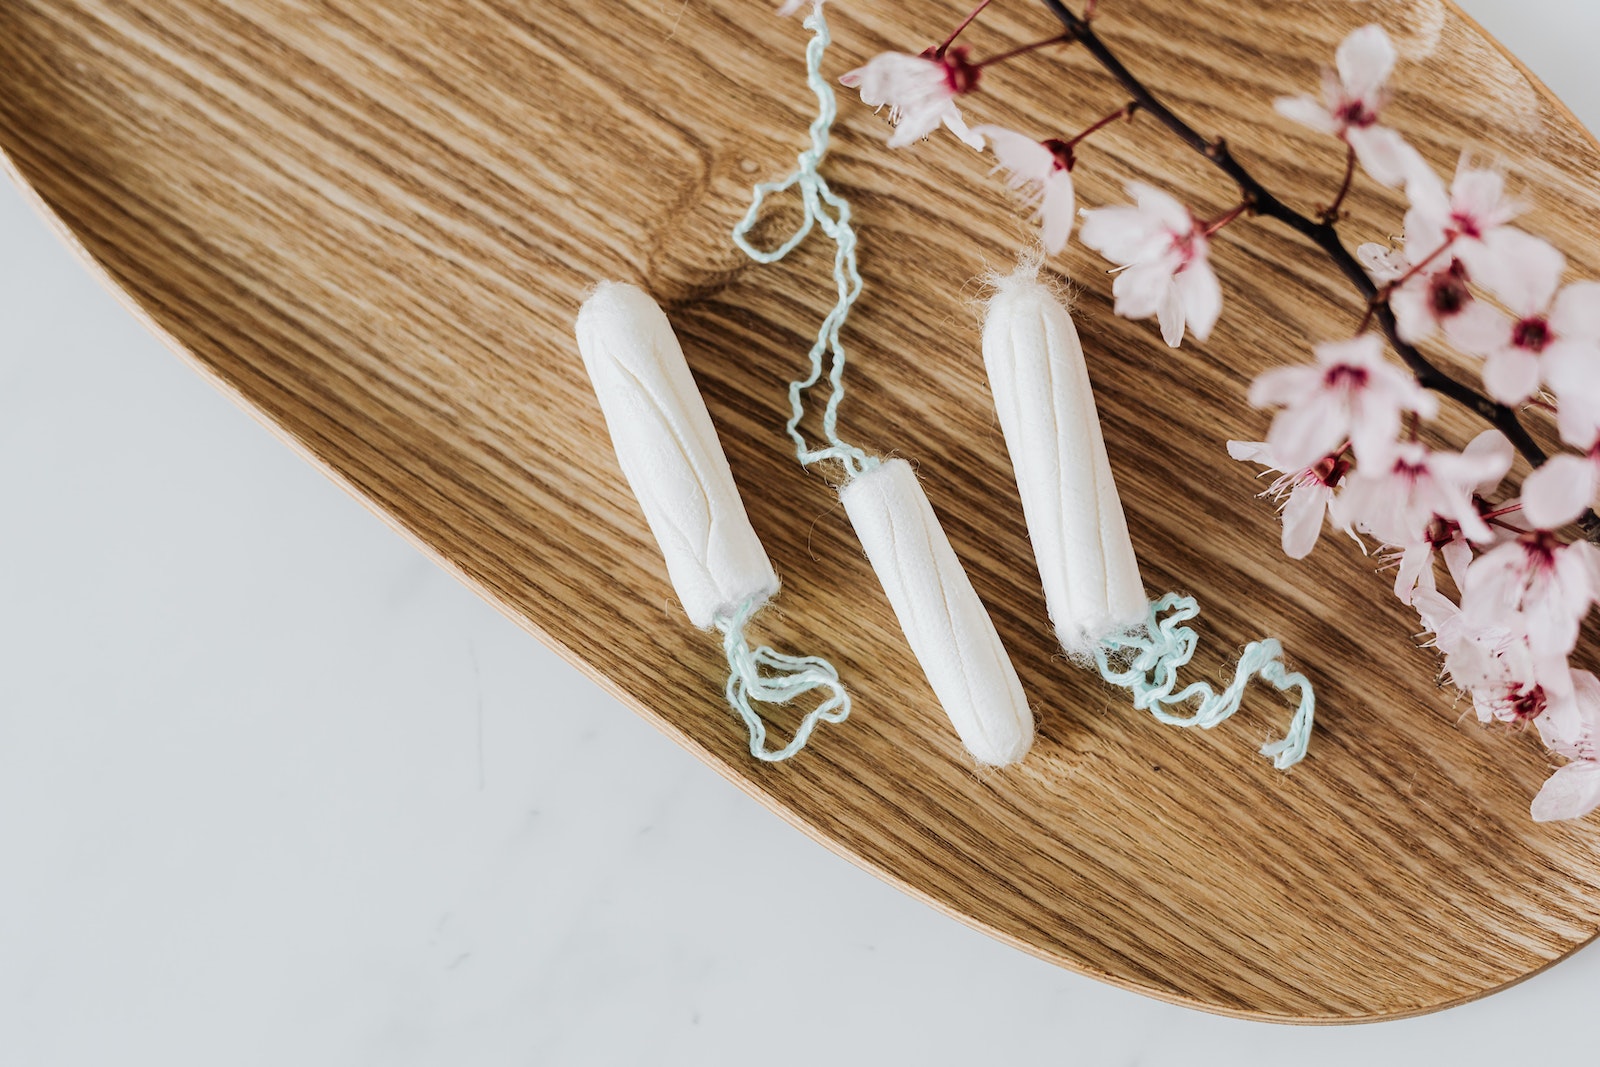 From above of hygienic cotton tampons placed on bamboo board with small pink flowers